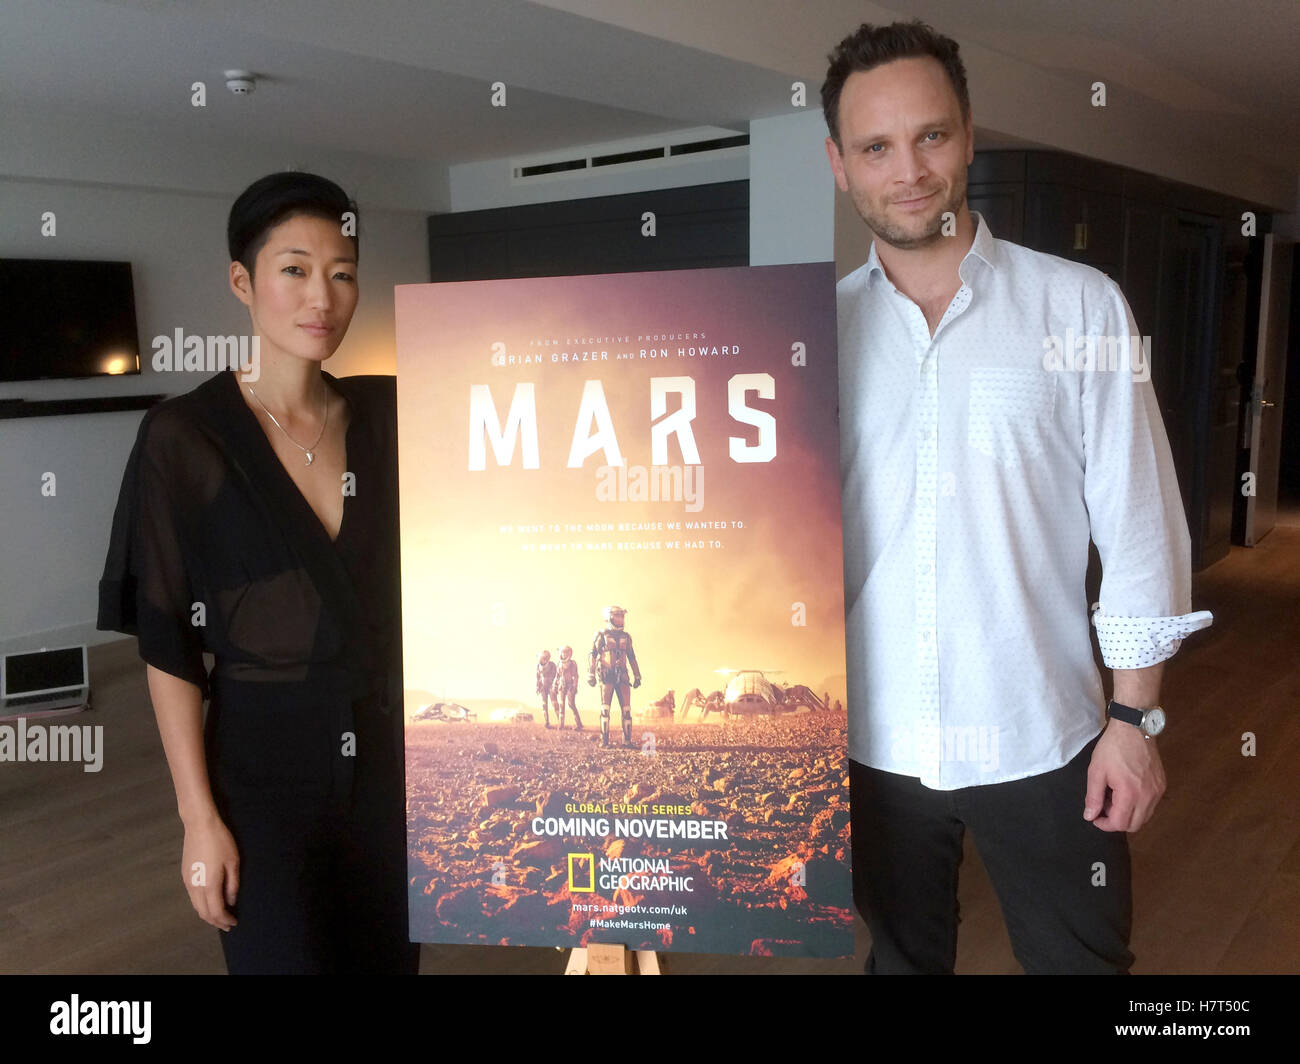 London, UK. 19th Oct, 2016. The main actors of the six-episode TV series 'MARS' of the National Geographic Channel, Ben Cotton (R) and Jihae (L) pose next to a poster in London, England, 19 October 2016. Cotton plays the character of commander Ben Sawyer, while Jihae portrays the twins Hana and Joon Seung. Photo: Katrin Kasper/dpa/Alamy Live News Stock Photo